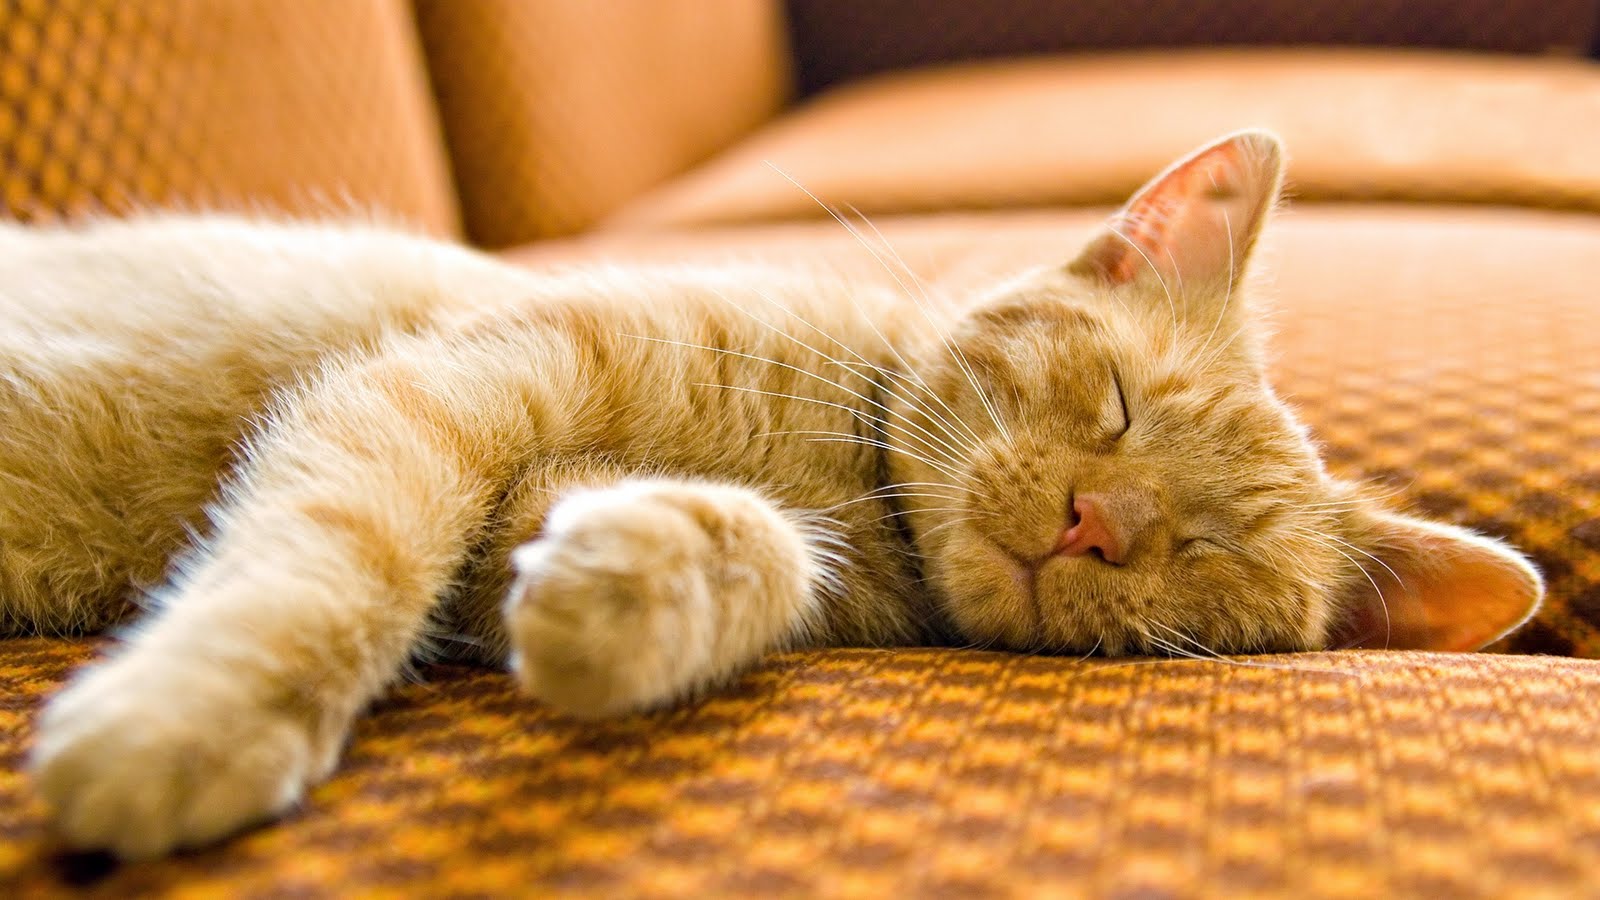 Free download Yellow Cat Sleeping On Couch HD Wallpaper Epic Desktop Background [1600x900] for your Desktop, Mobile & Tablet. Explore Epic Cat Wallpaper. Epic Anime Wallpaper, Epic HD Wallpaper